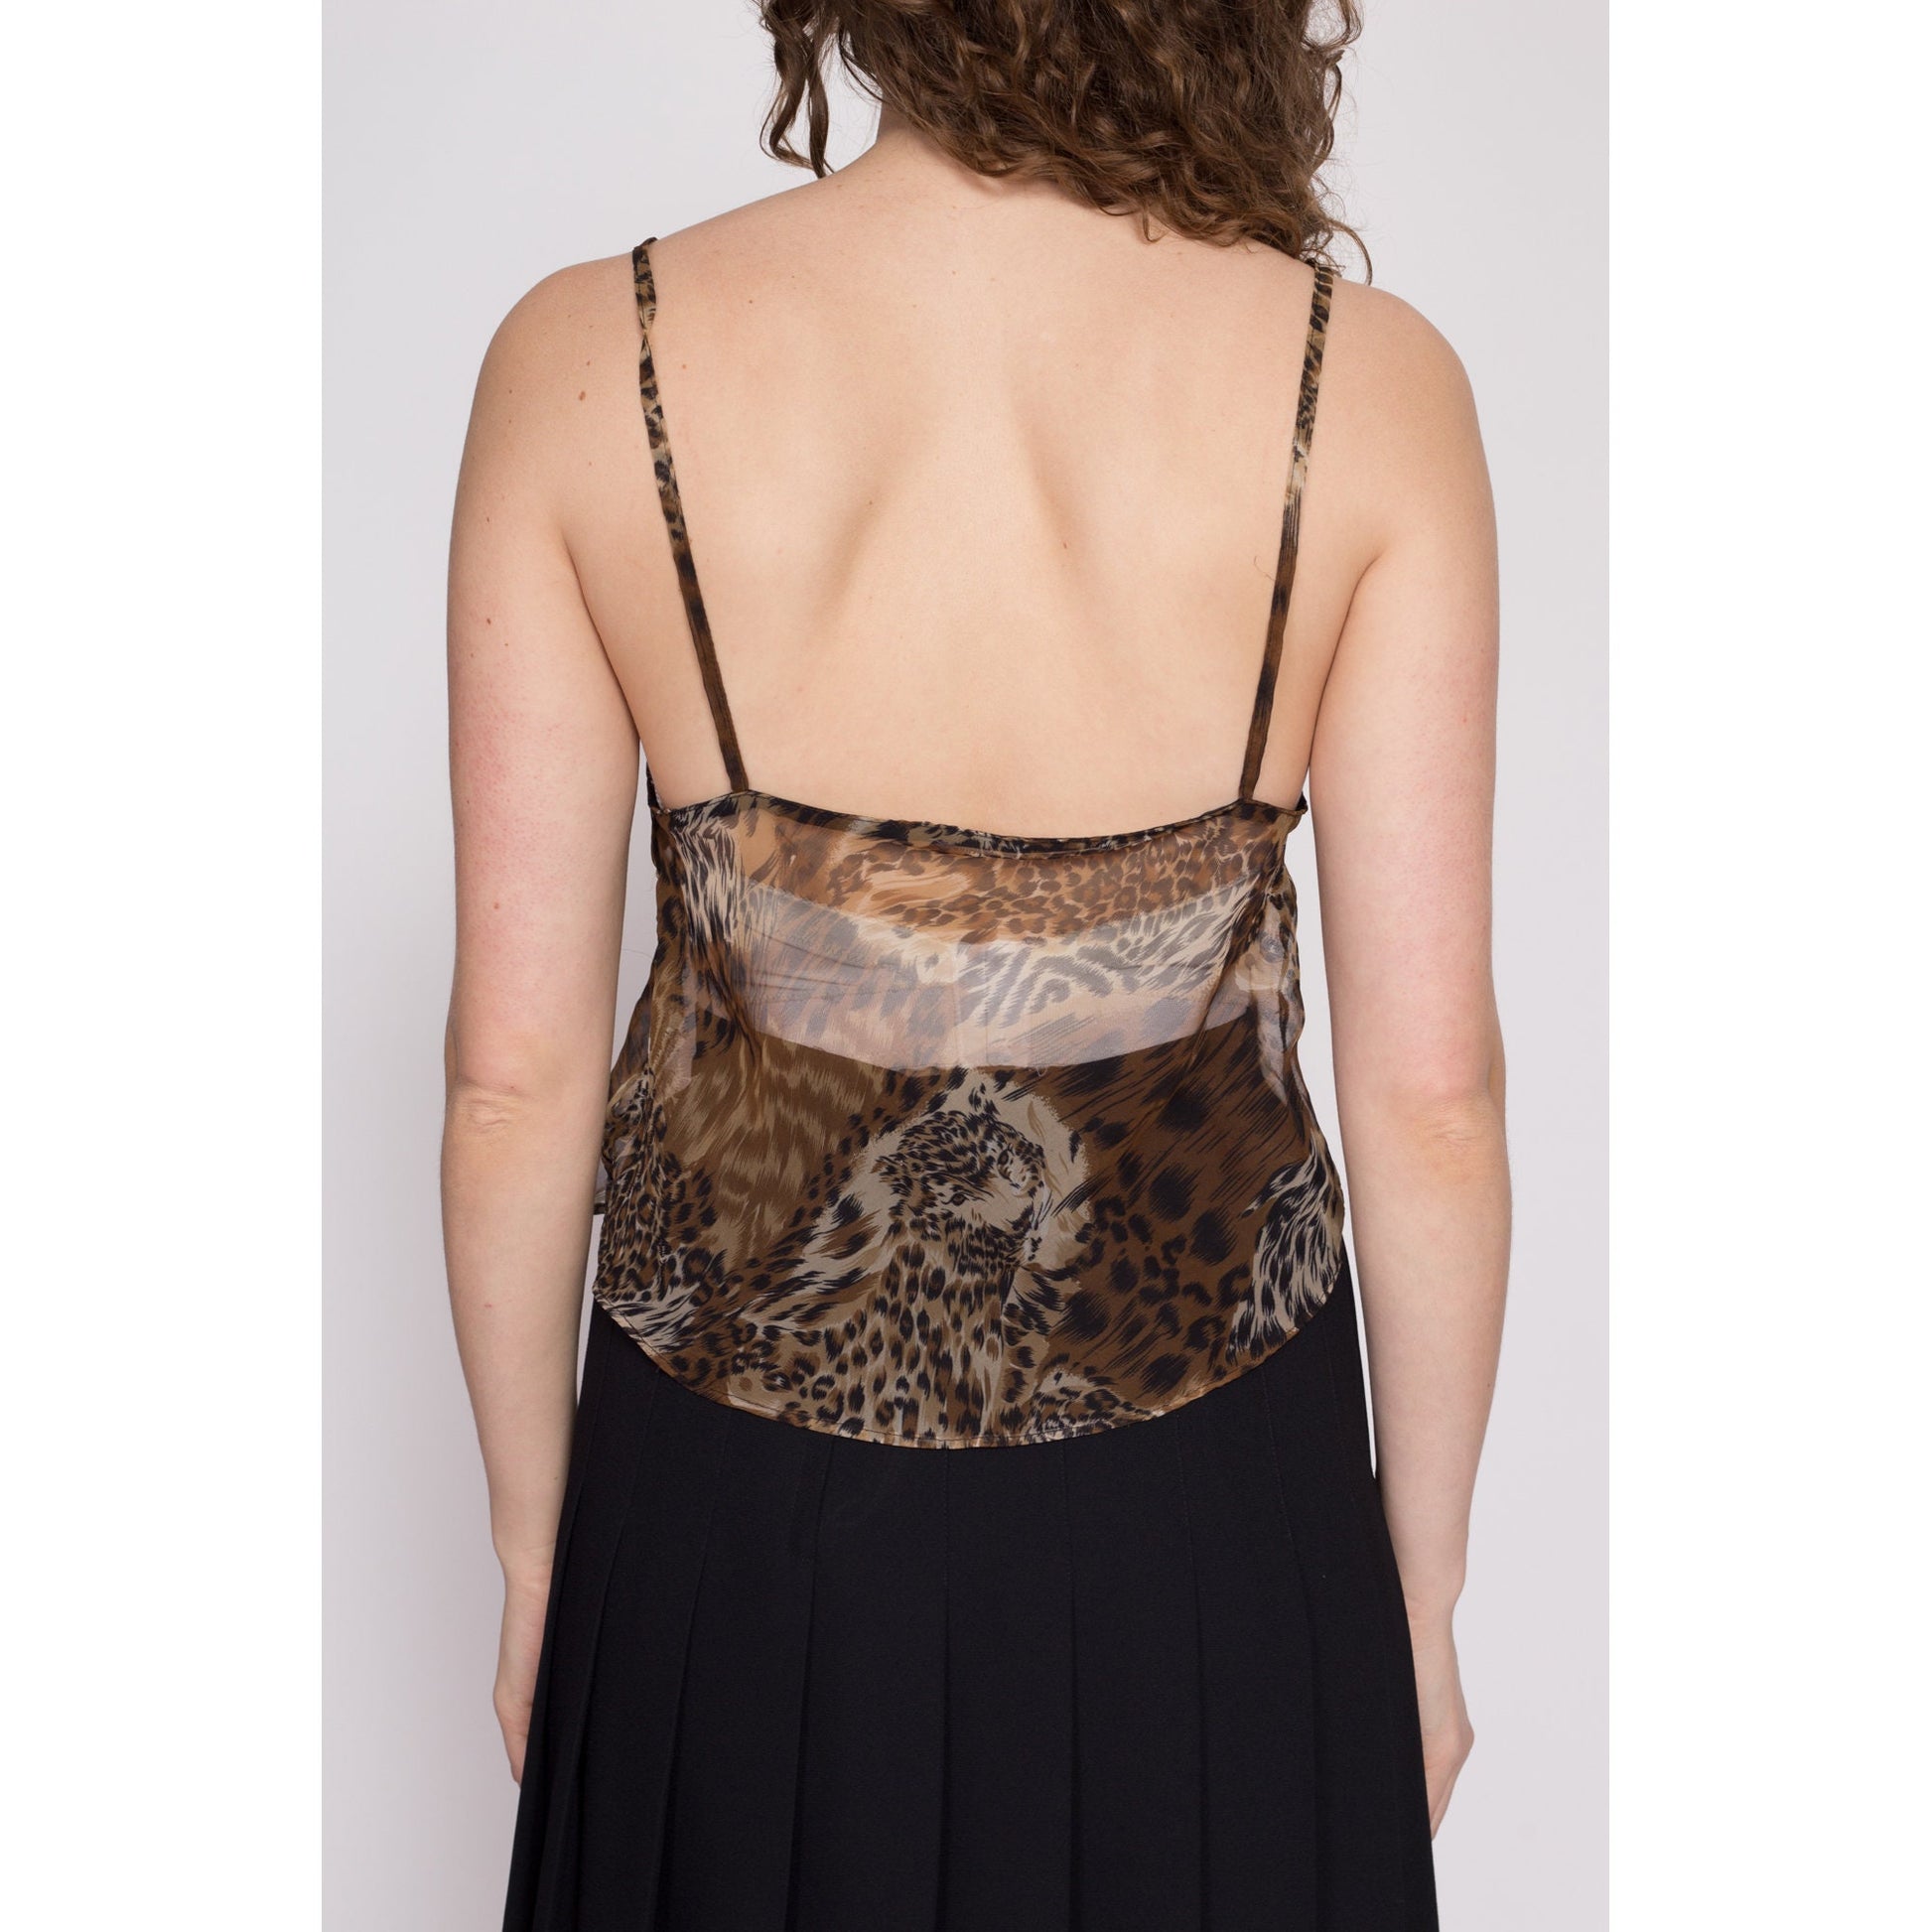 Vintage Sheer Lace Trim Camisole - Small